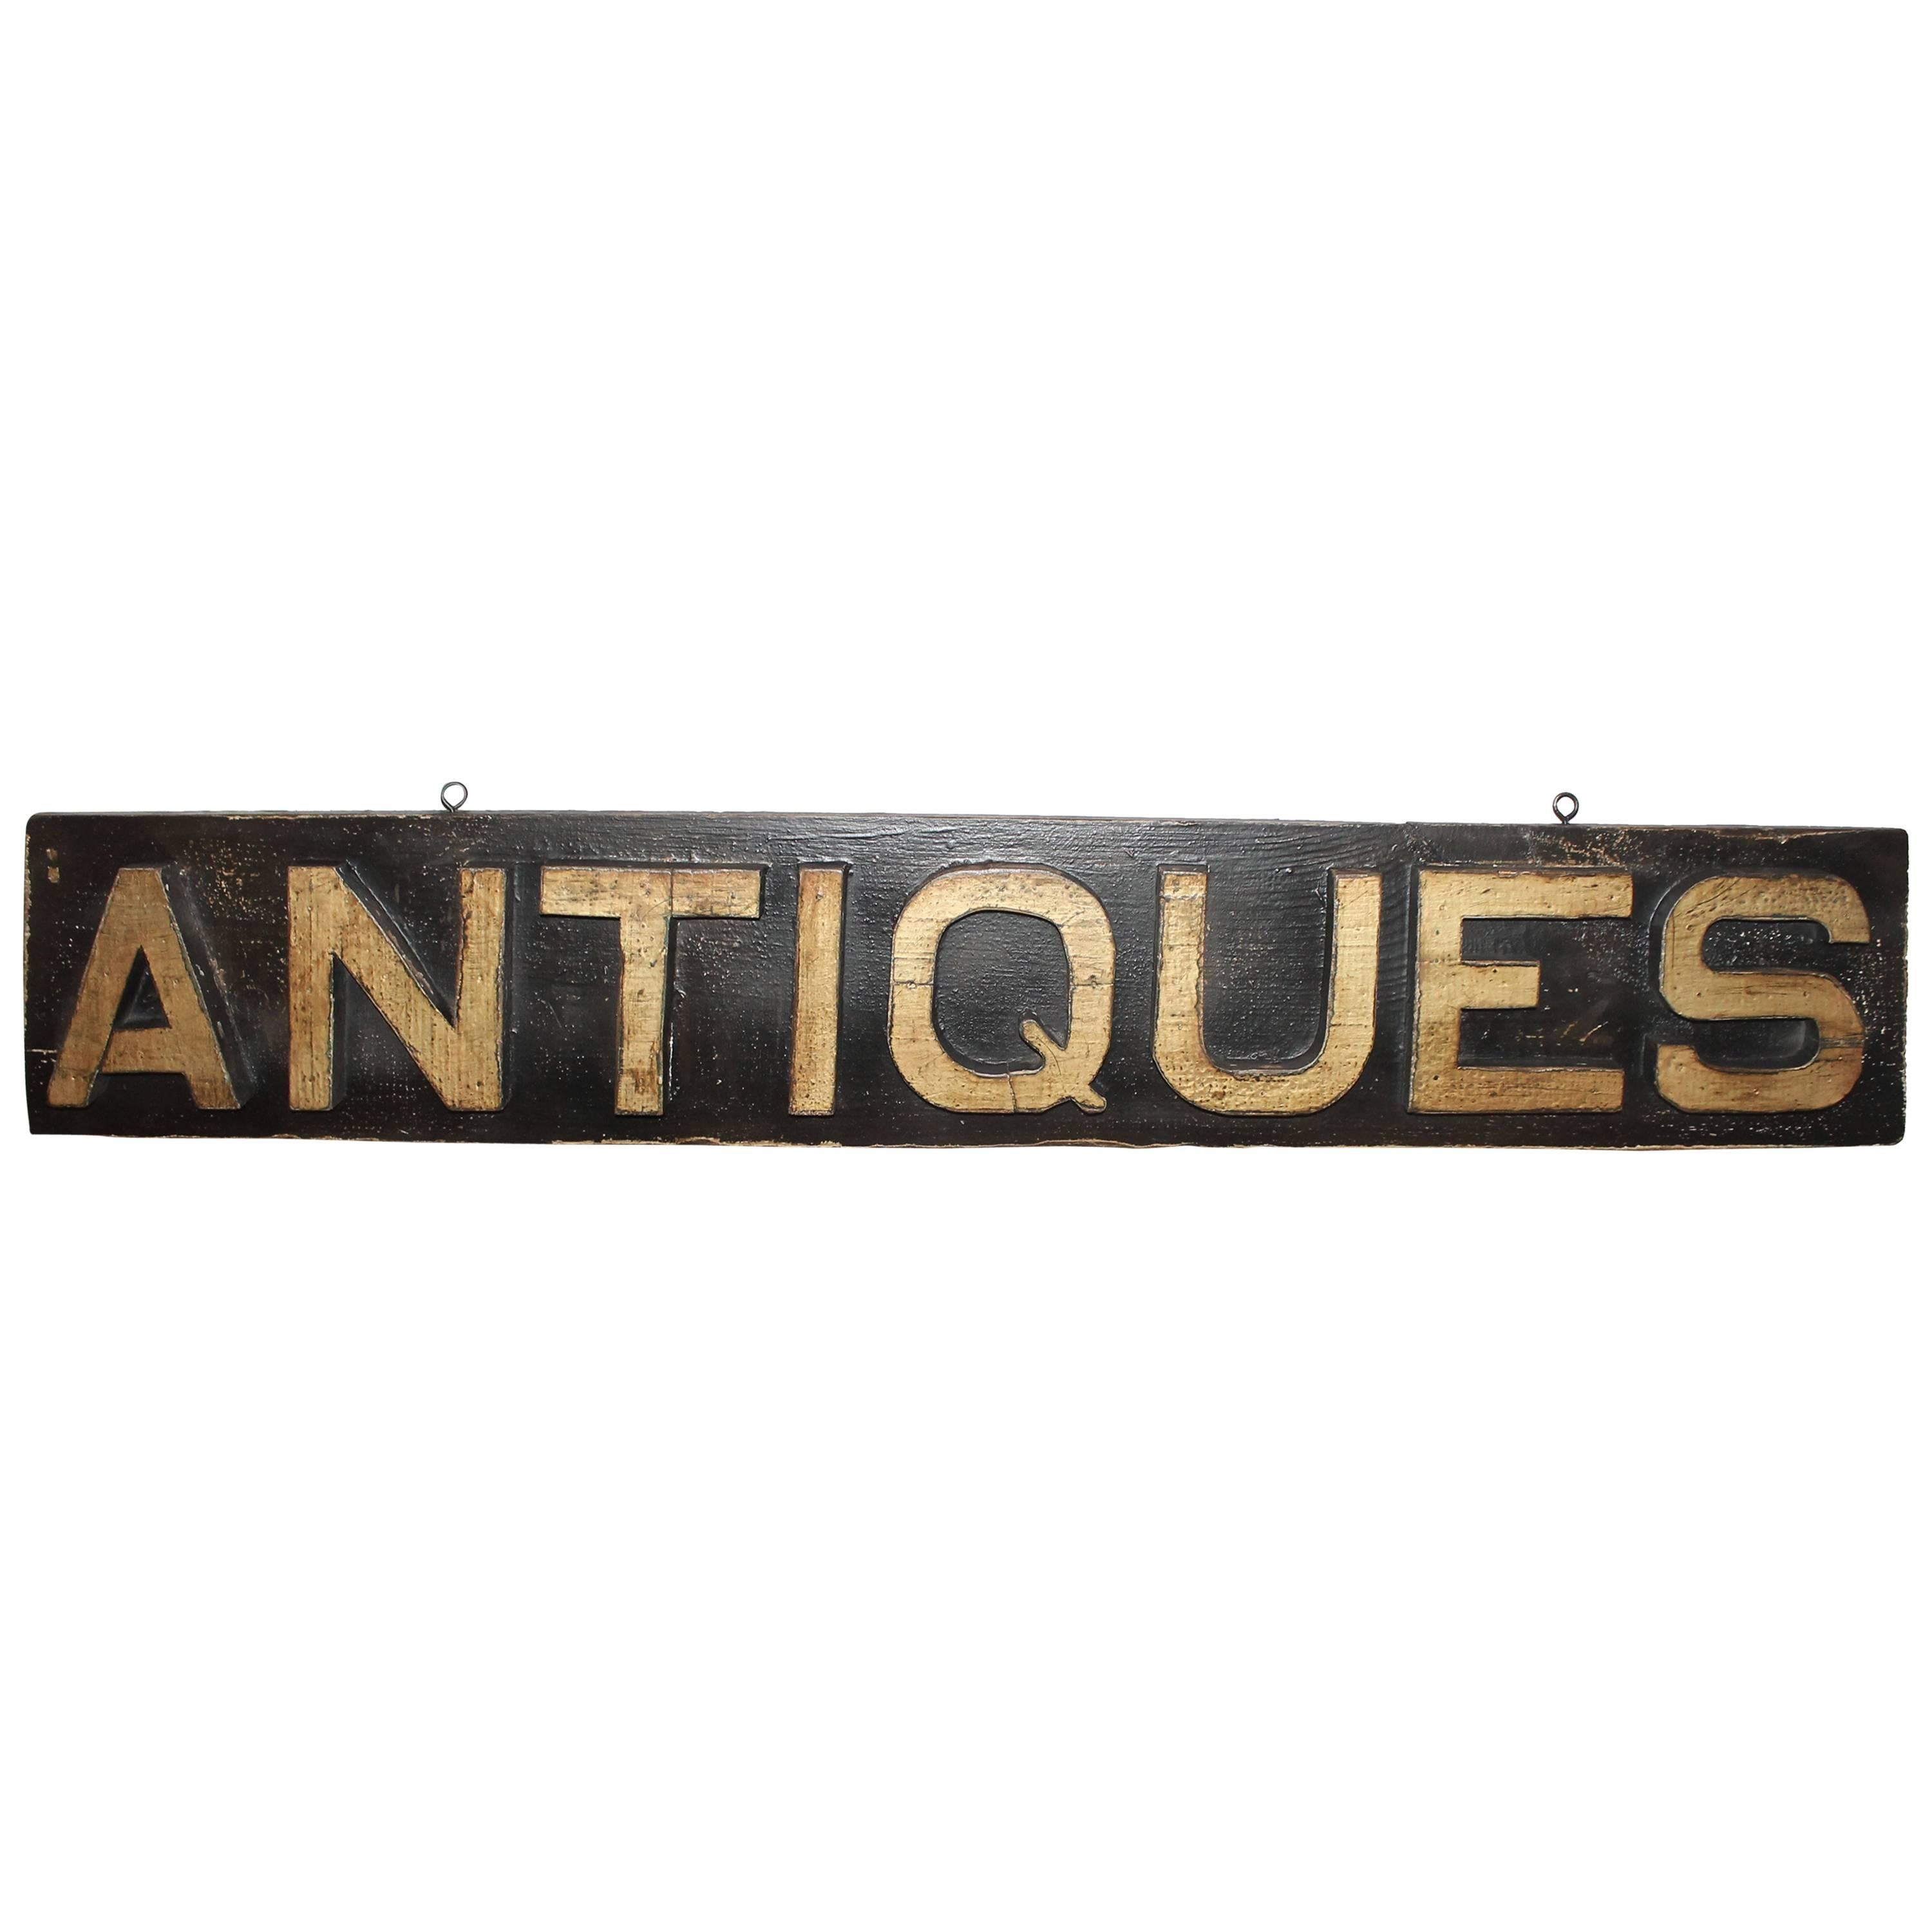 Vintage "Antiques" Trade Sign from New England